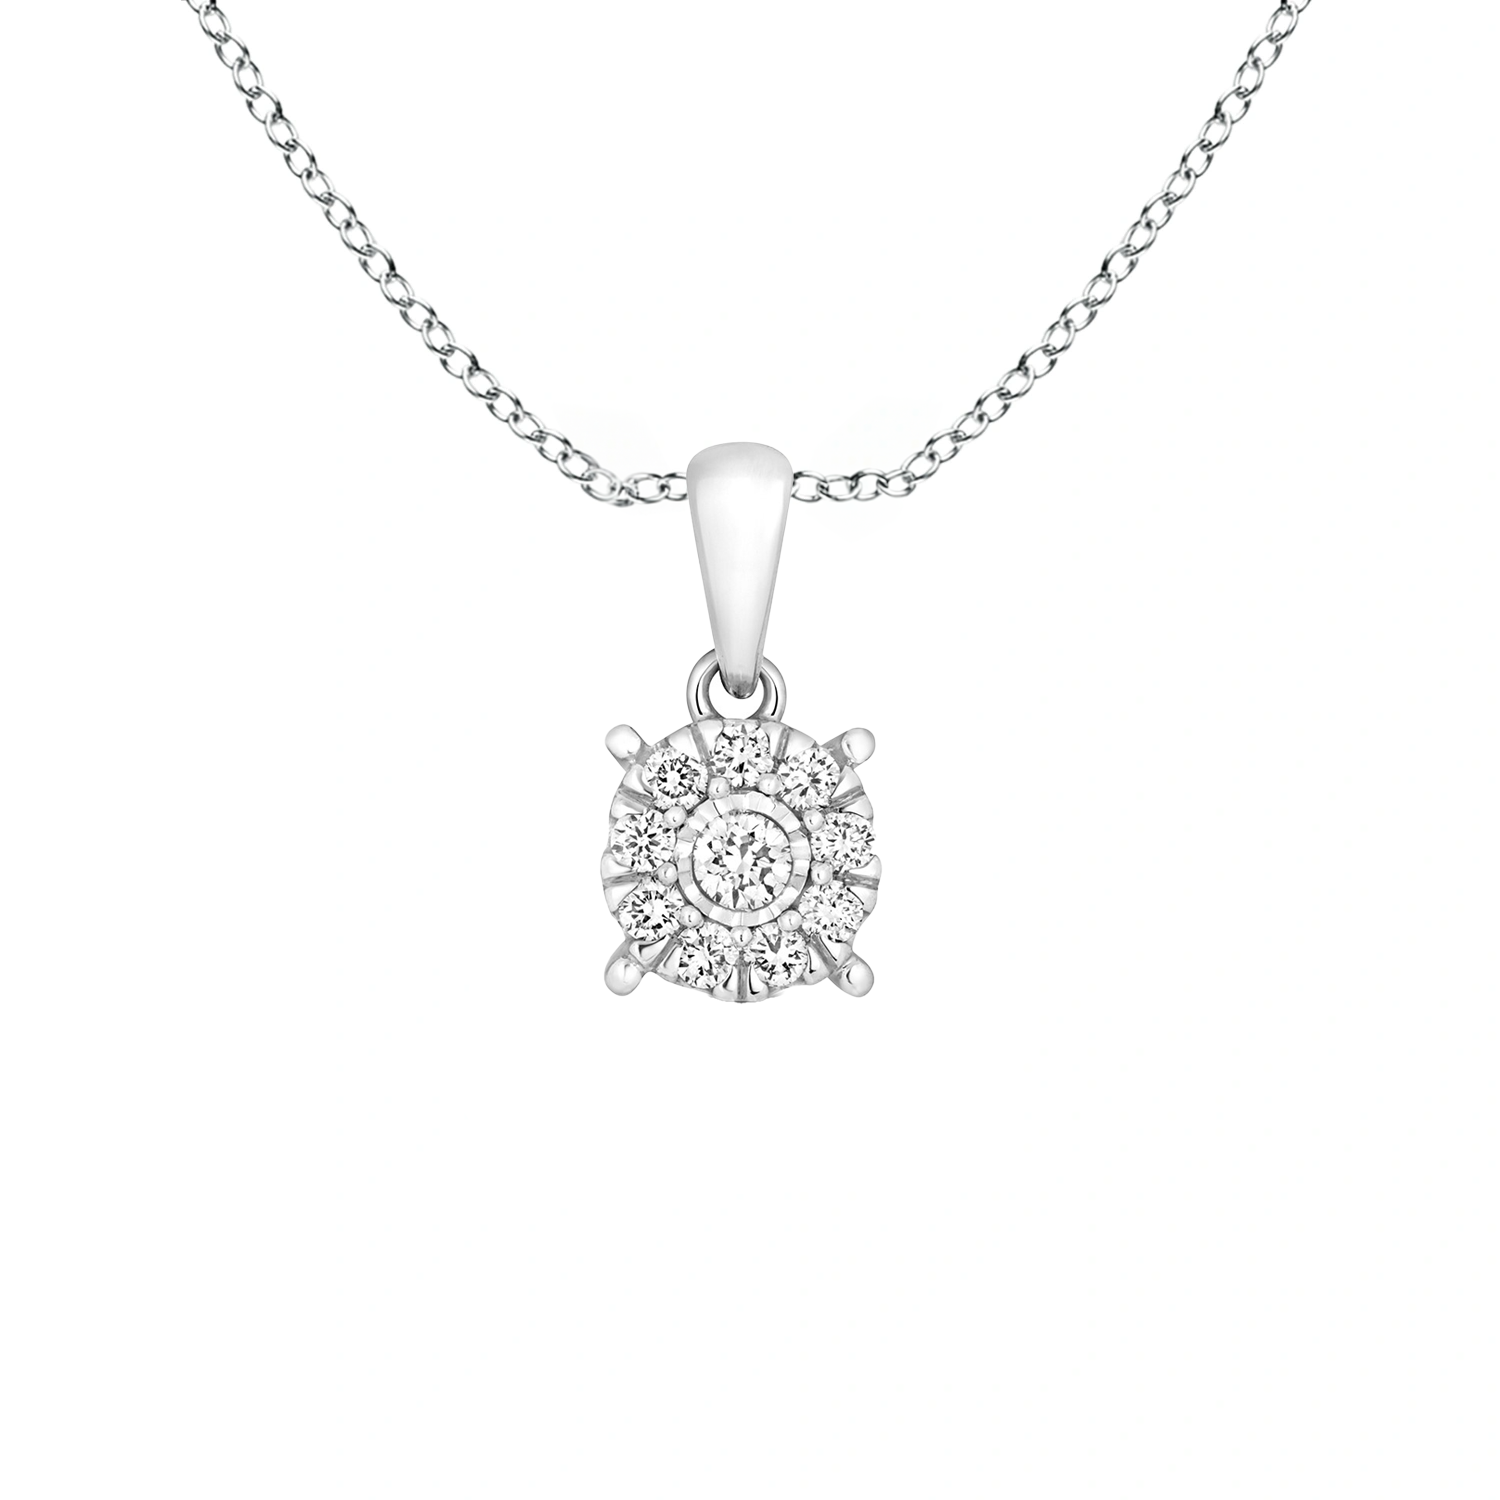 18ct White Gold Diamond Solitaire Solid Bale Pendant with Chain